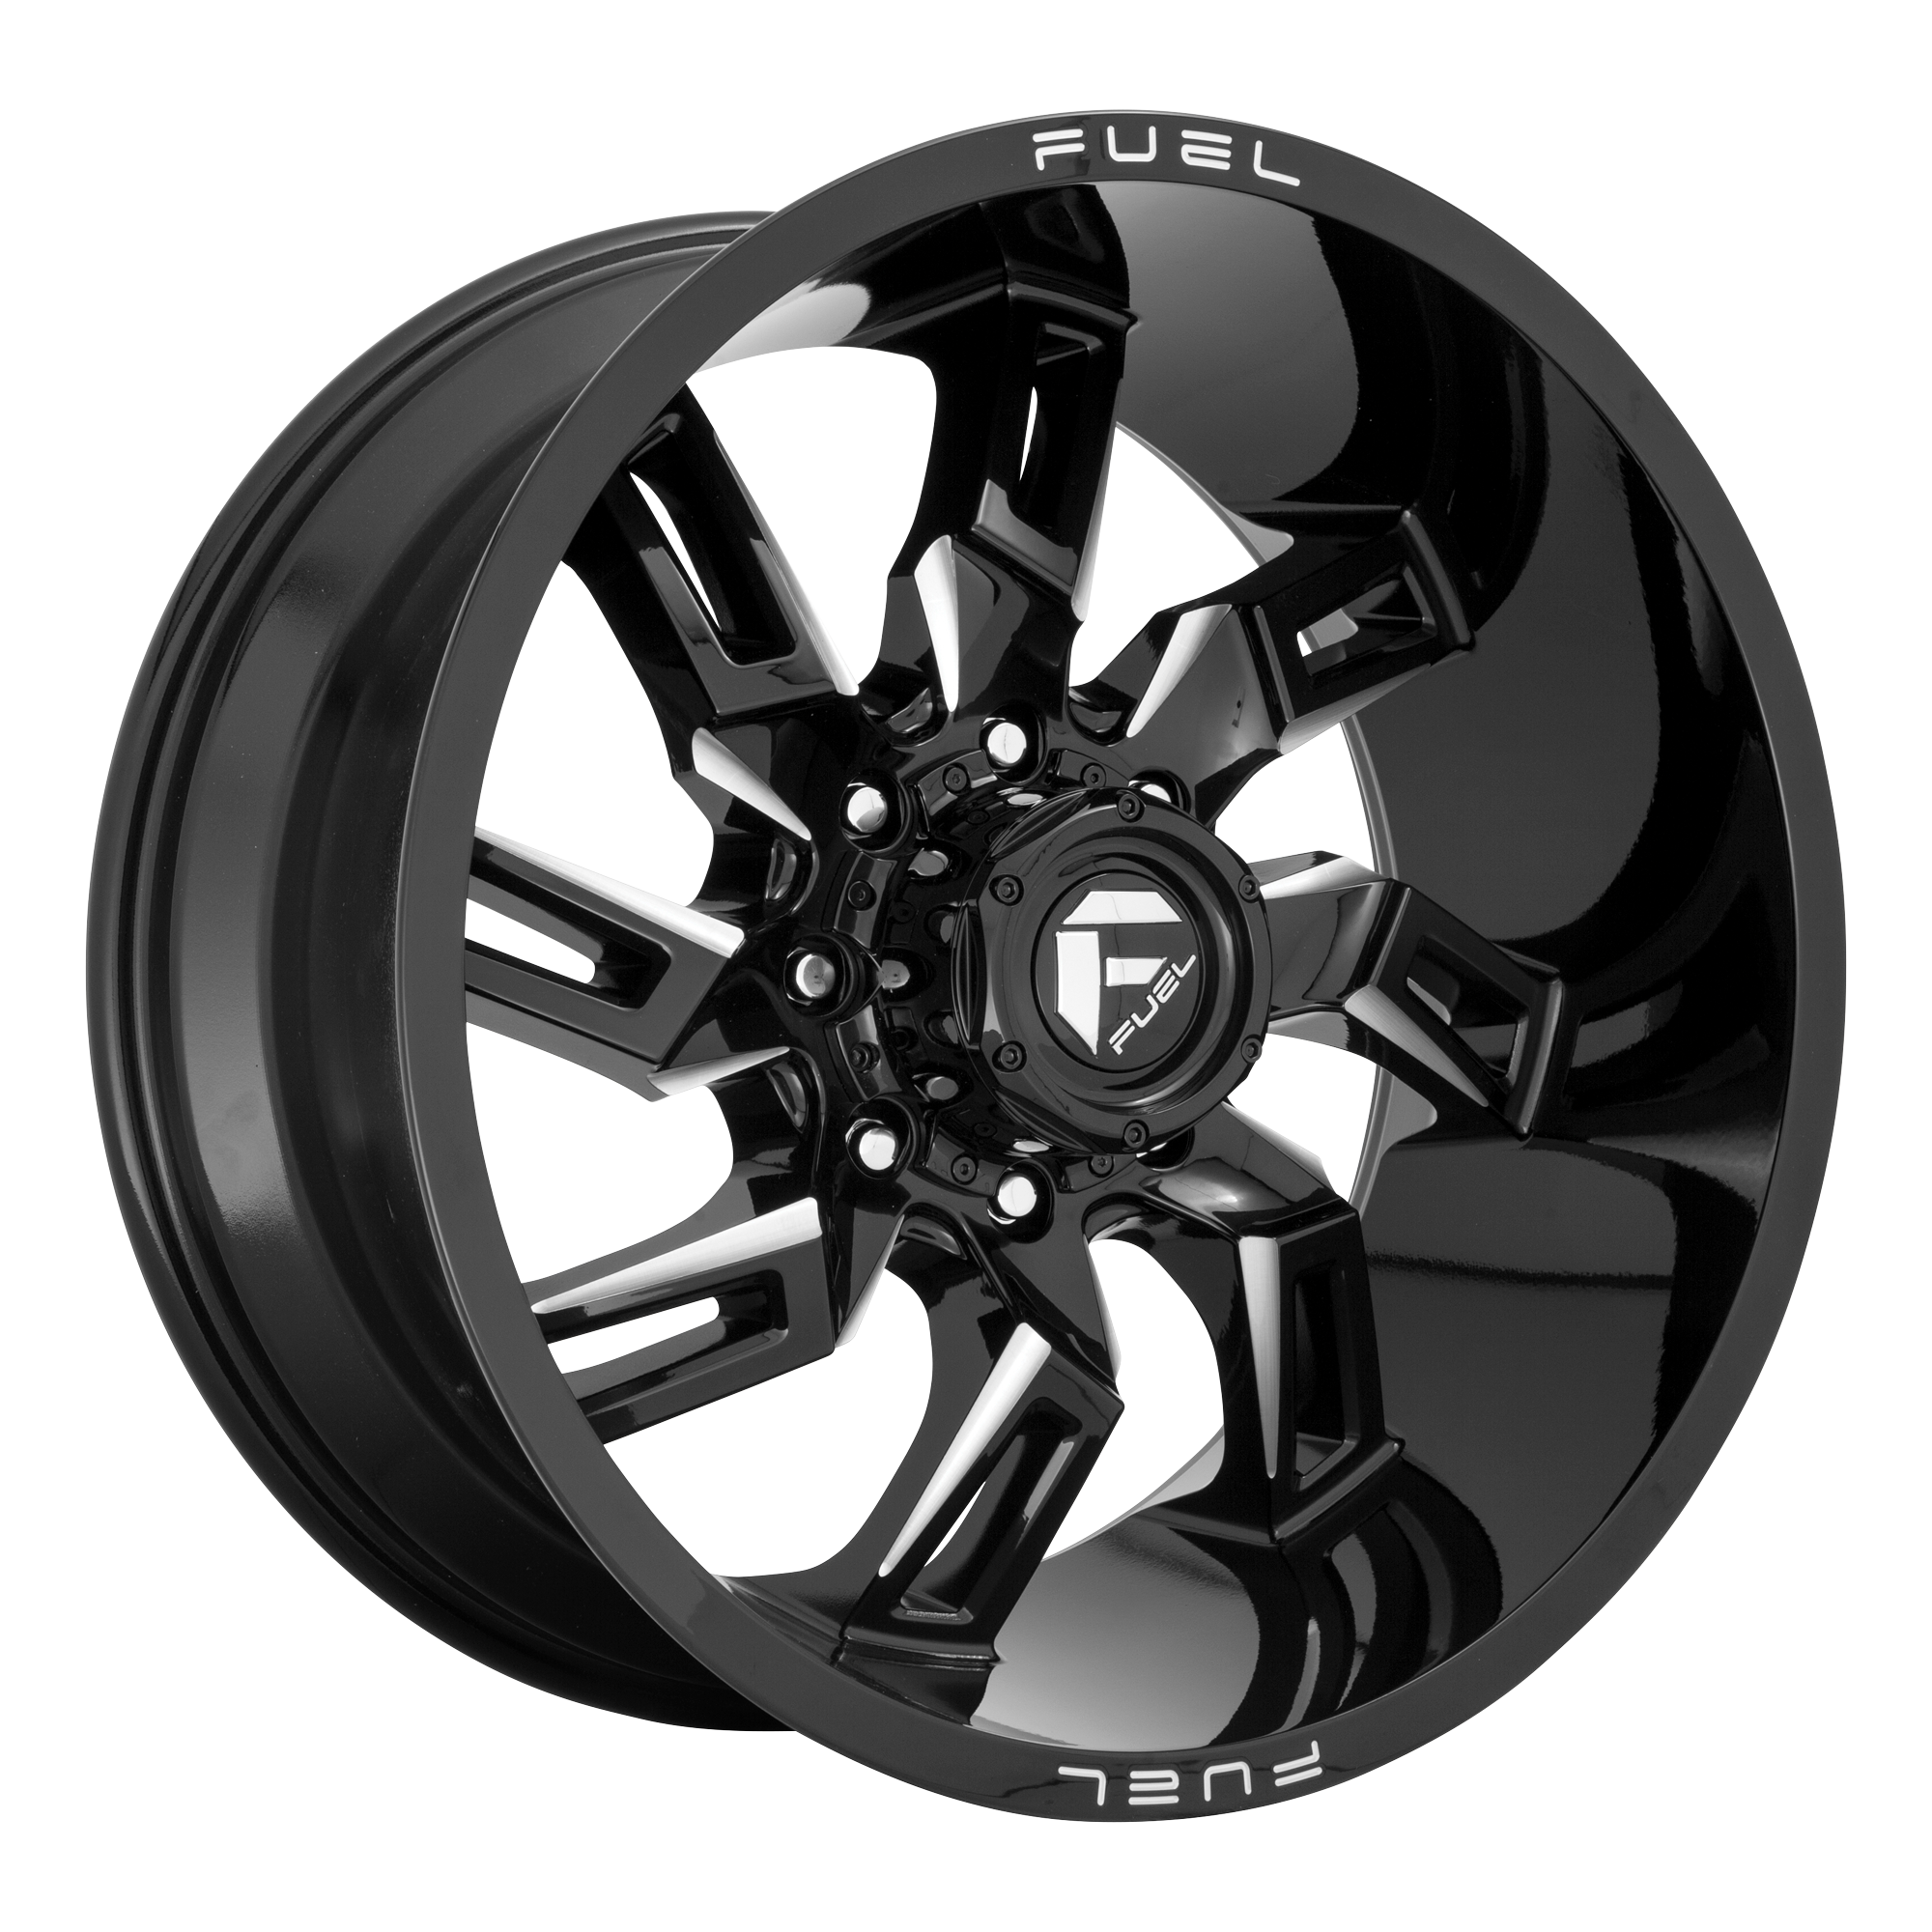 LOCKDOWN 20x9 5x127.00 GLOSS BLACK MILLED (1 mm) - Tires and Engine Performance